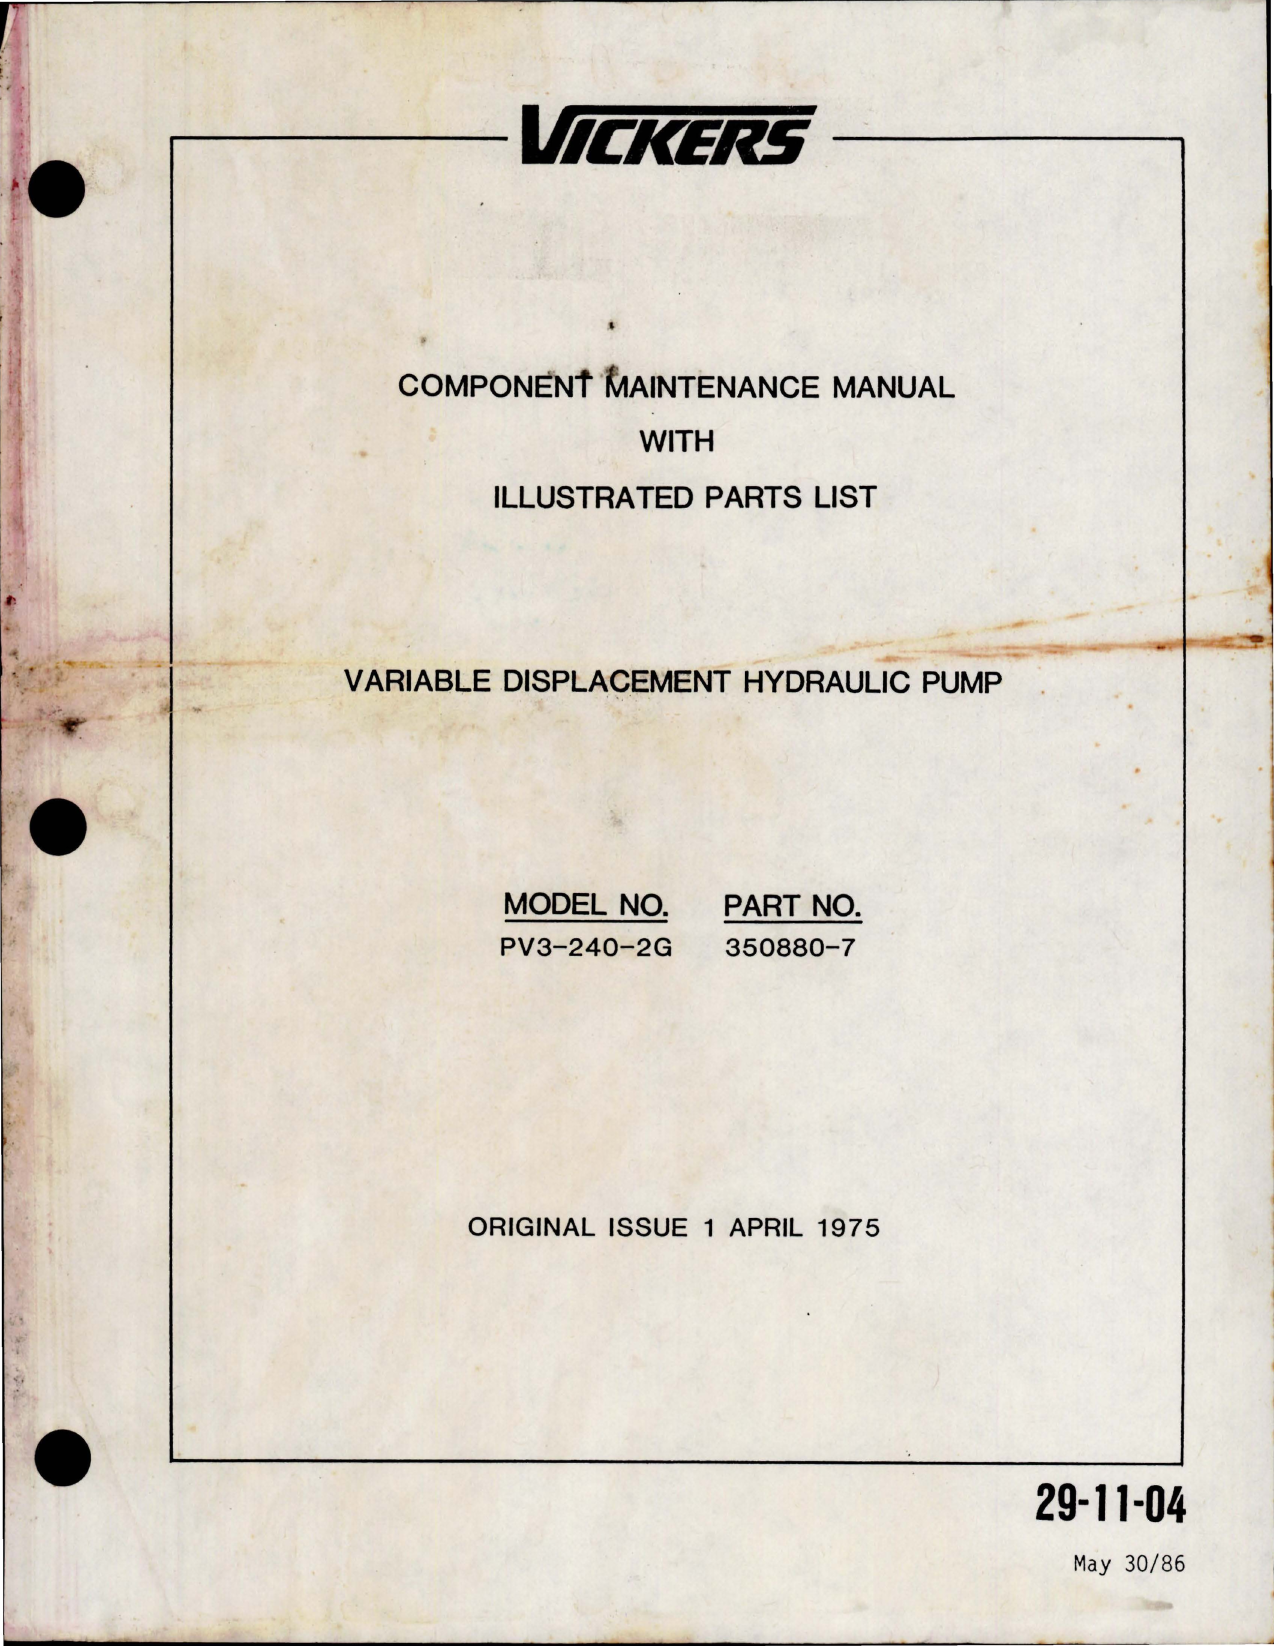 Sample page 1 from AirCorps Library document: Maintenance Manual with Illustrated Parts List for Variable Displacement Hydraulic Pump - Model PV3-240-2G - Part 350880-7